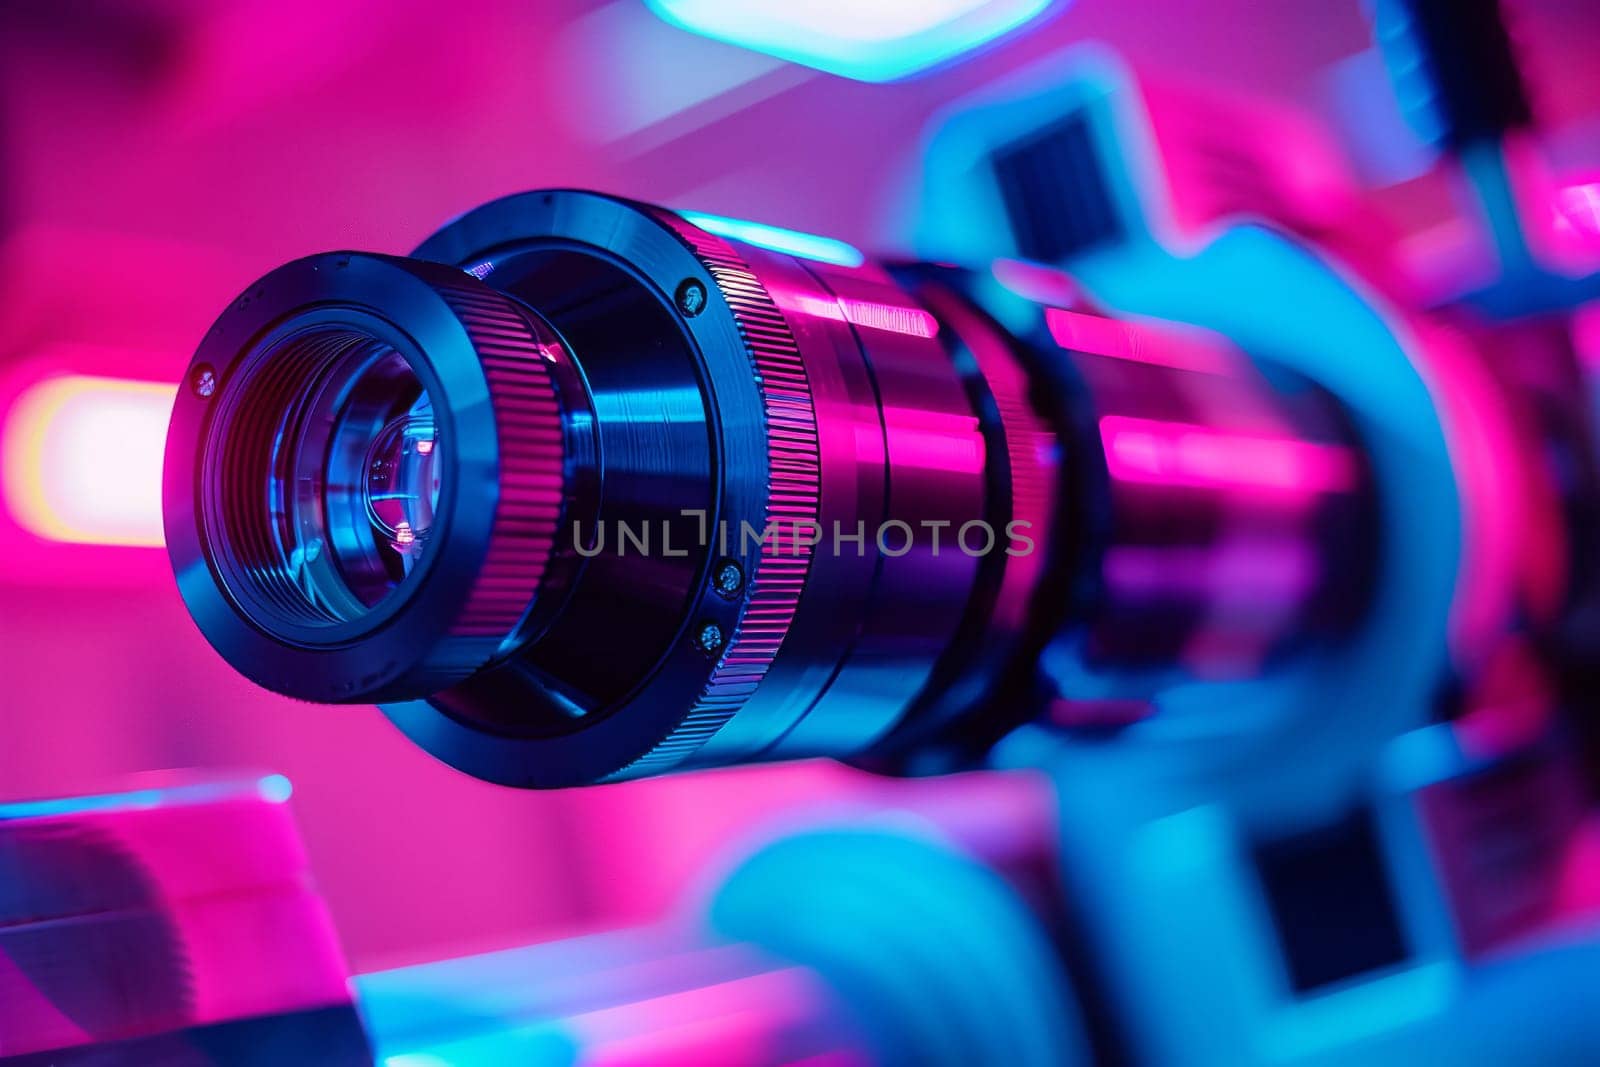 A close up of a camera lens with vibrant purple and electric blue lights in the background, creating a stunning visual effect for entertainment events